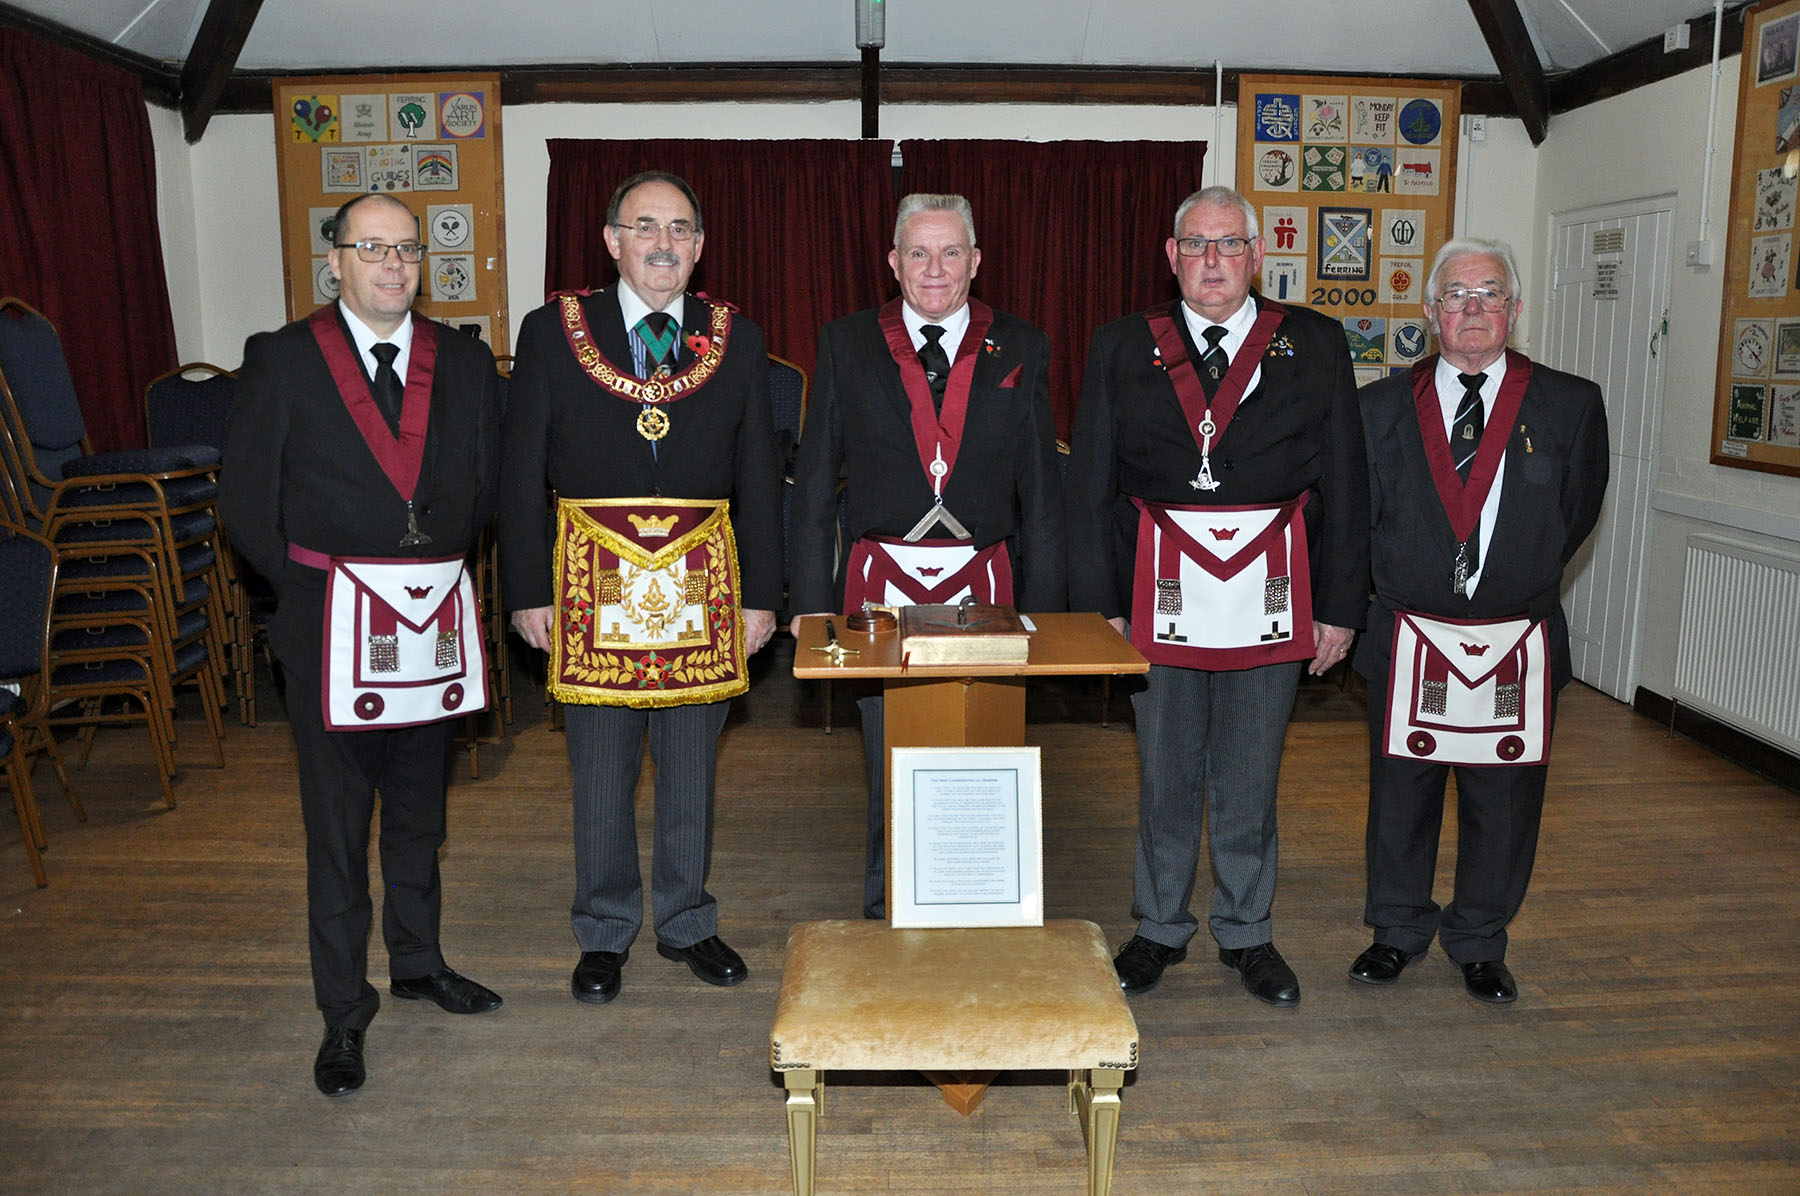 Executive Visit by the Provincial Grand Master to the Court of the South Saxons